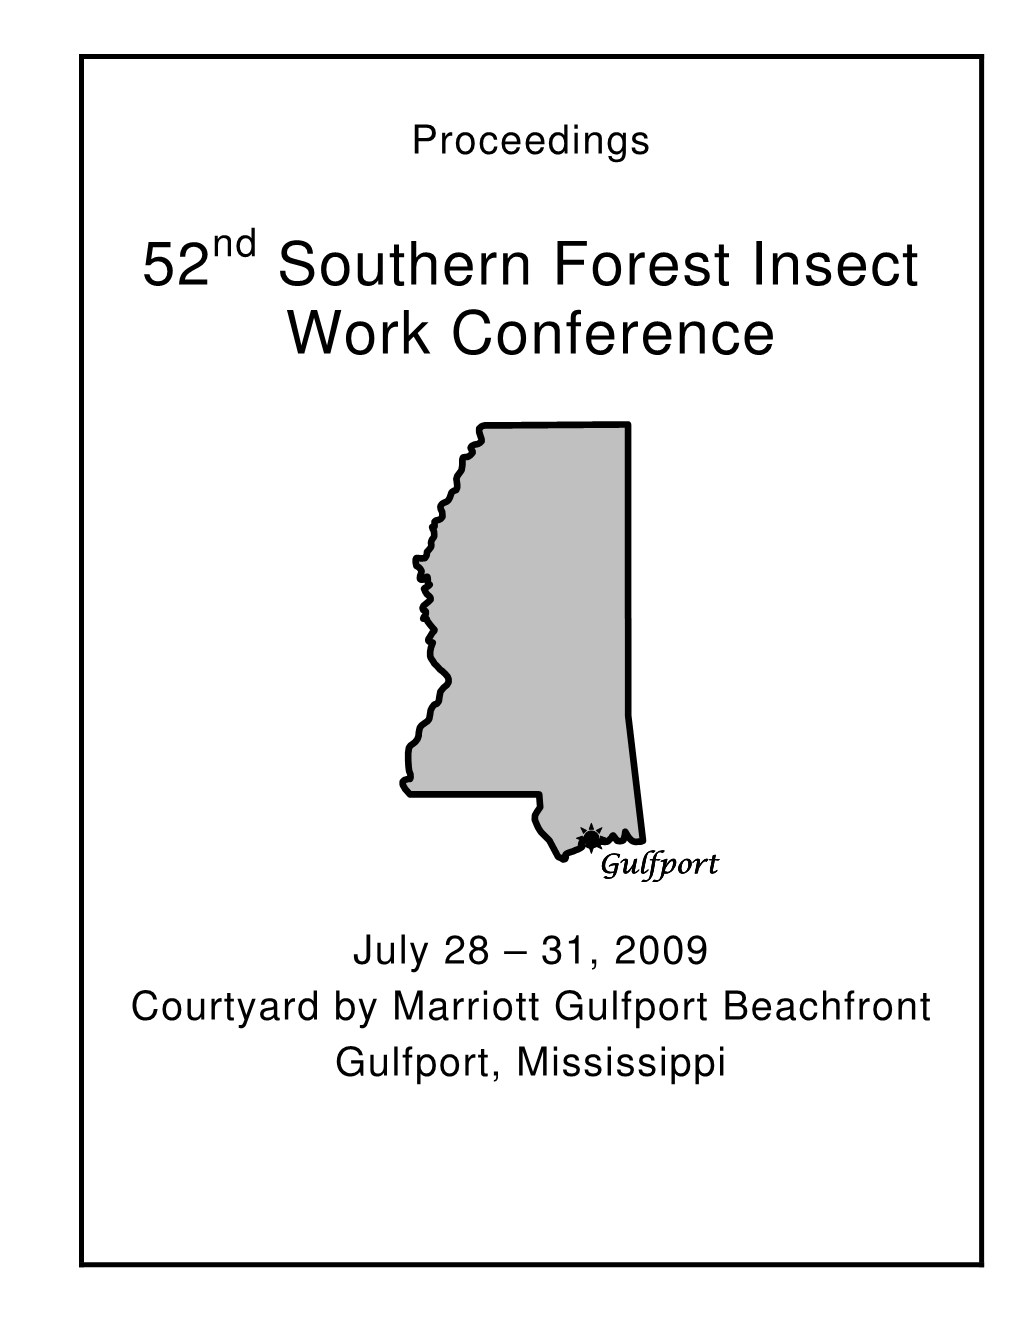 52 Southern Forest Insect Work Conference